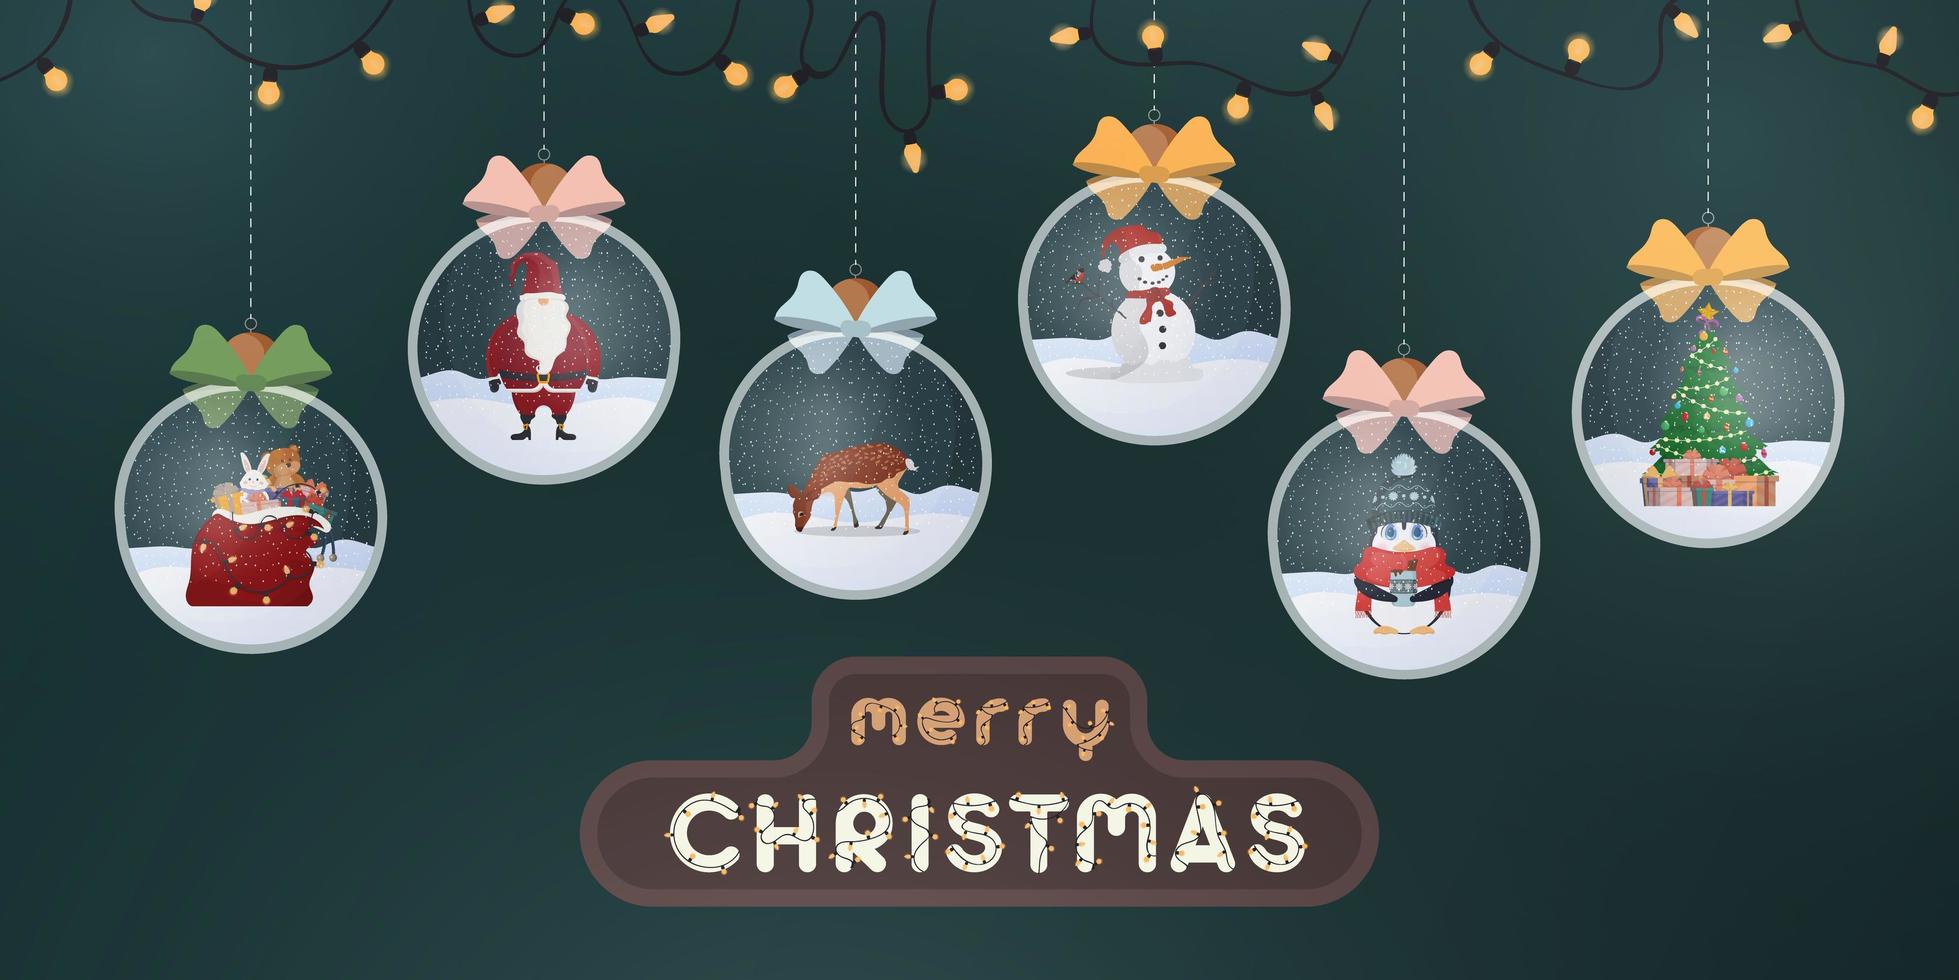 Merry christmas green banner. Transparent round toys with snow and bersonages inside. Garland with bulbs. Vector